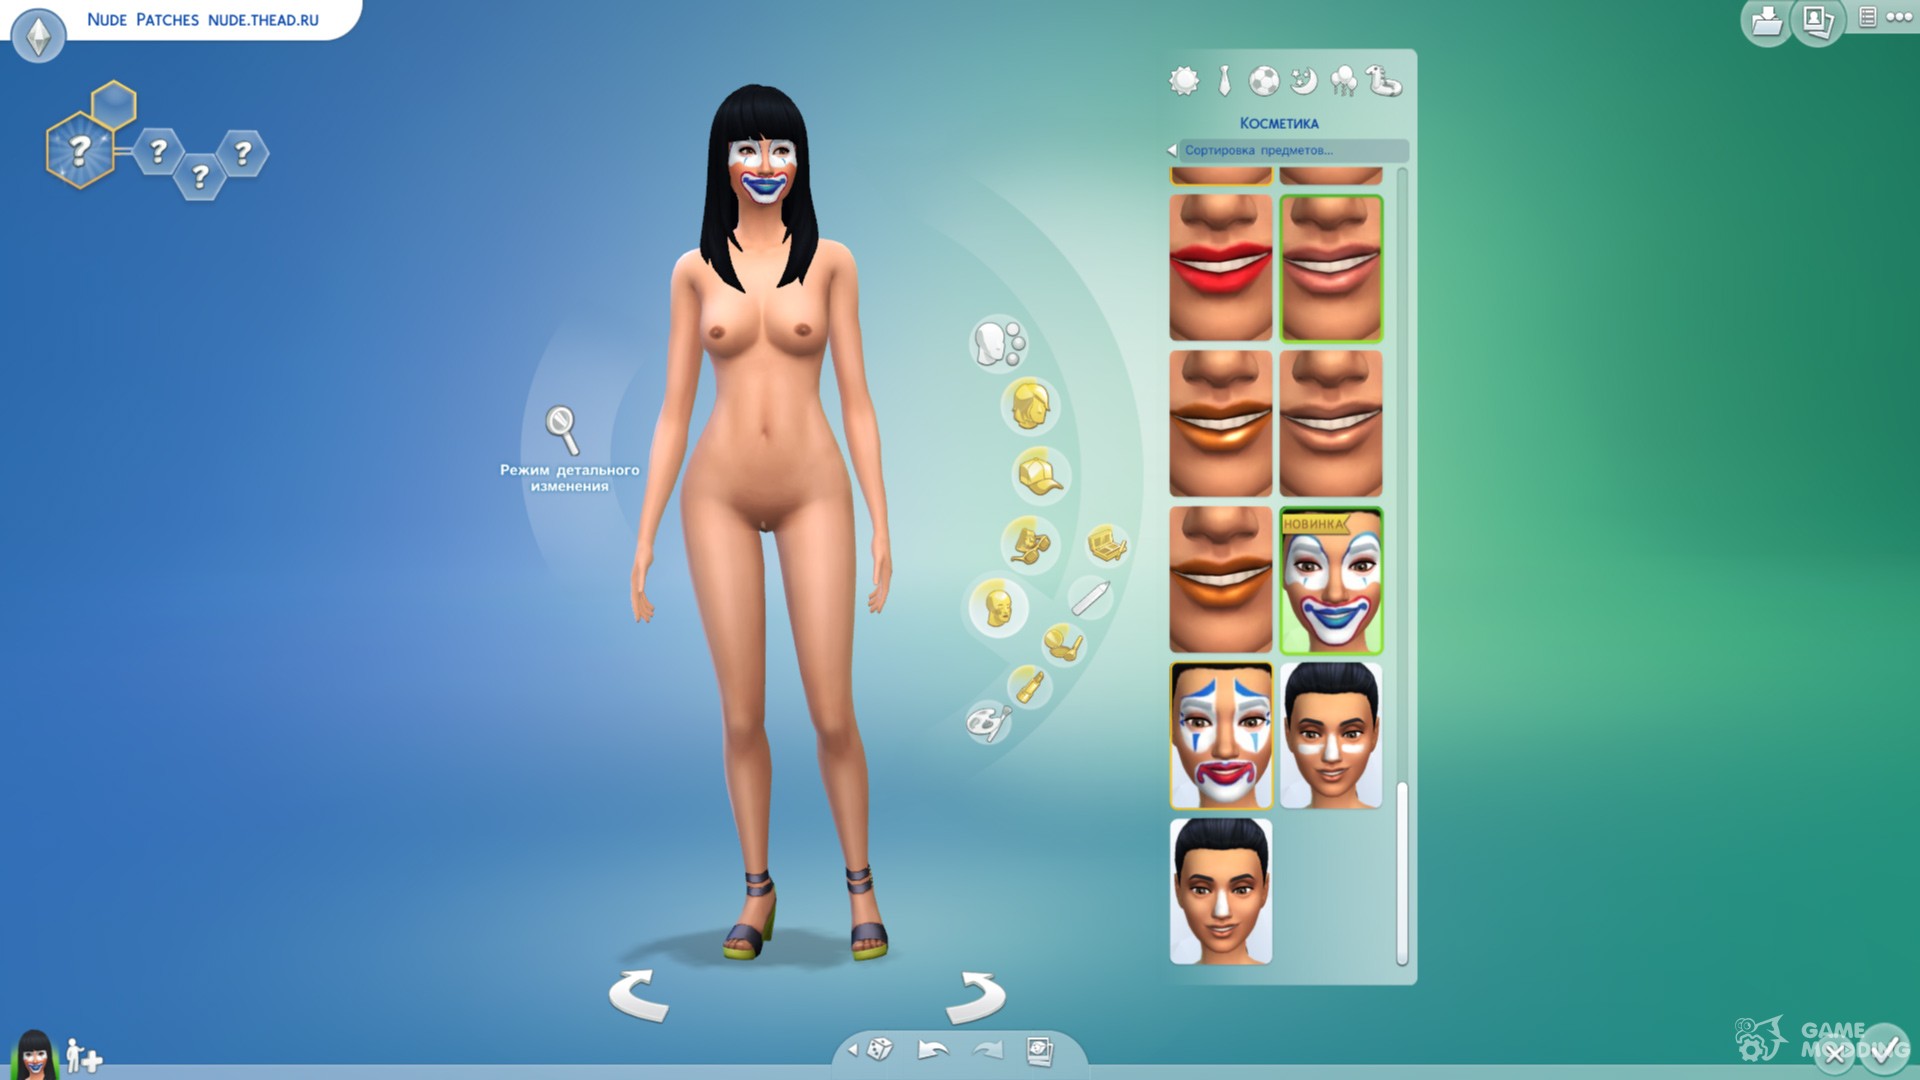 aj ngo recommends the sims 4 nude patch pic